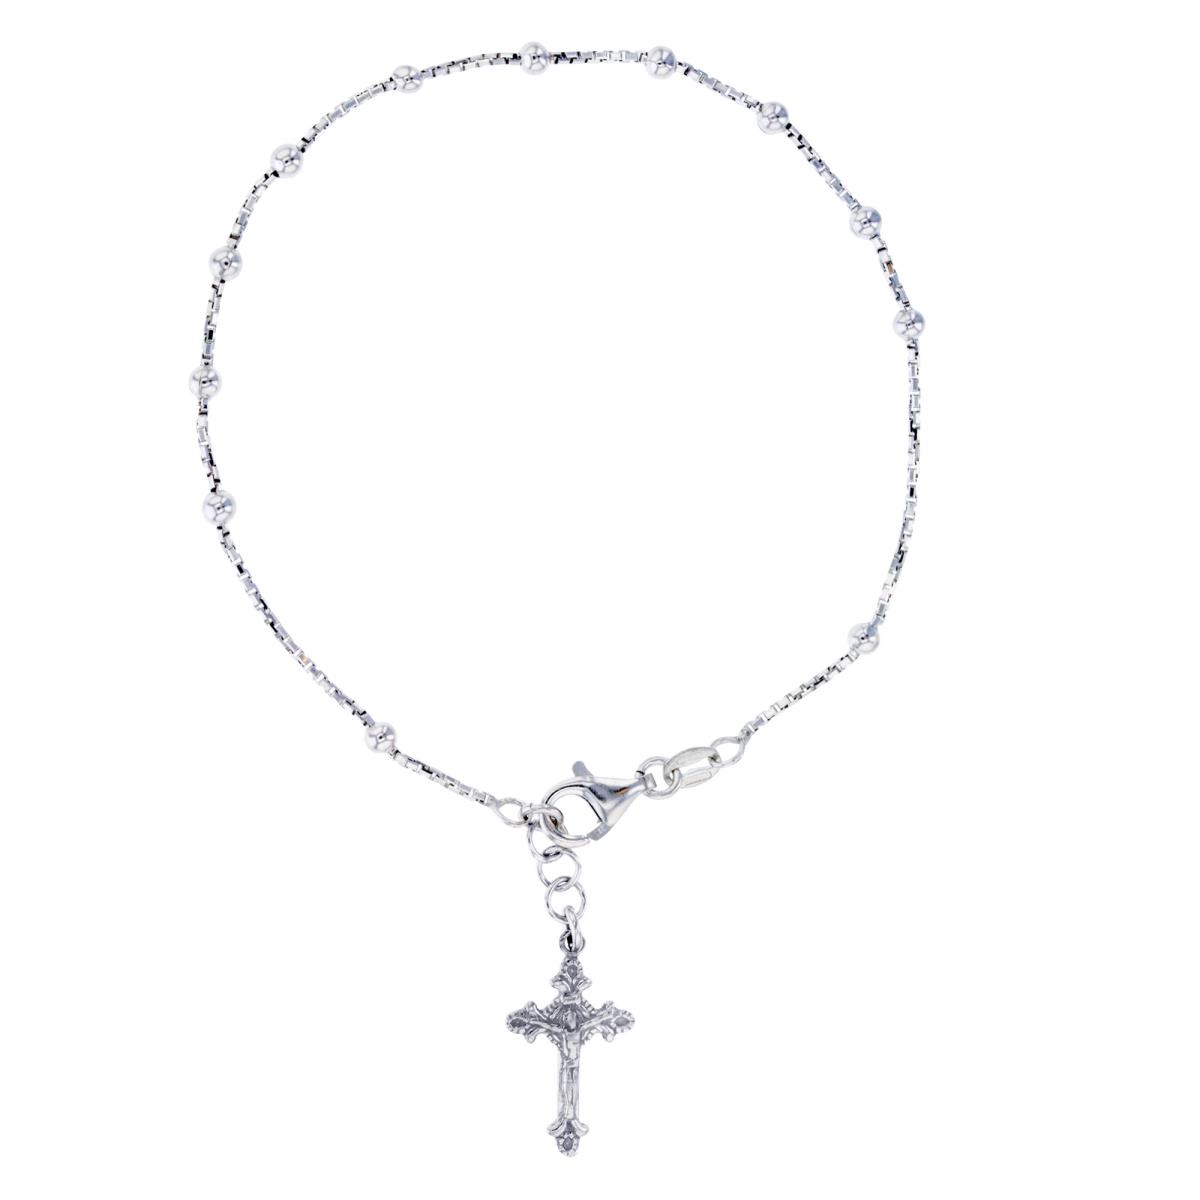 Sterling Silver Rhodium 20x12mm Crucifix Charm & Beads on Chain 8"Rosary Bracelet